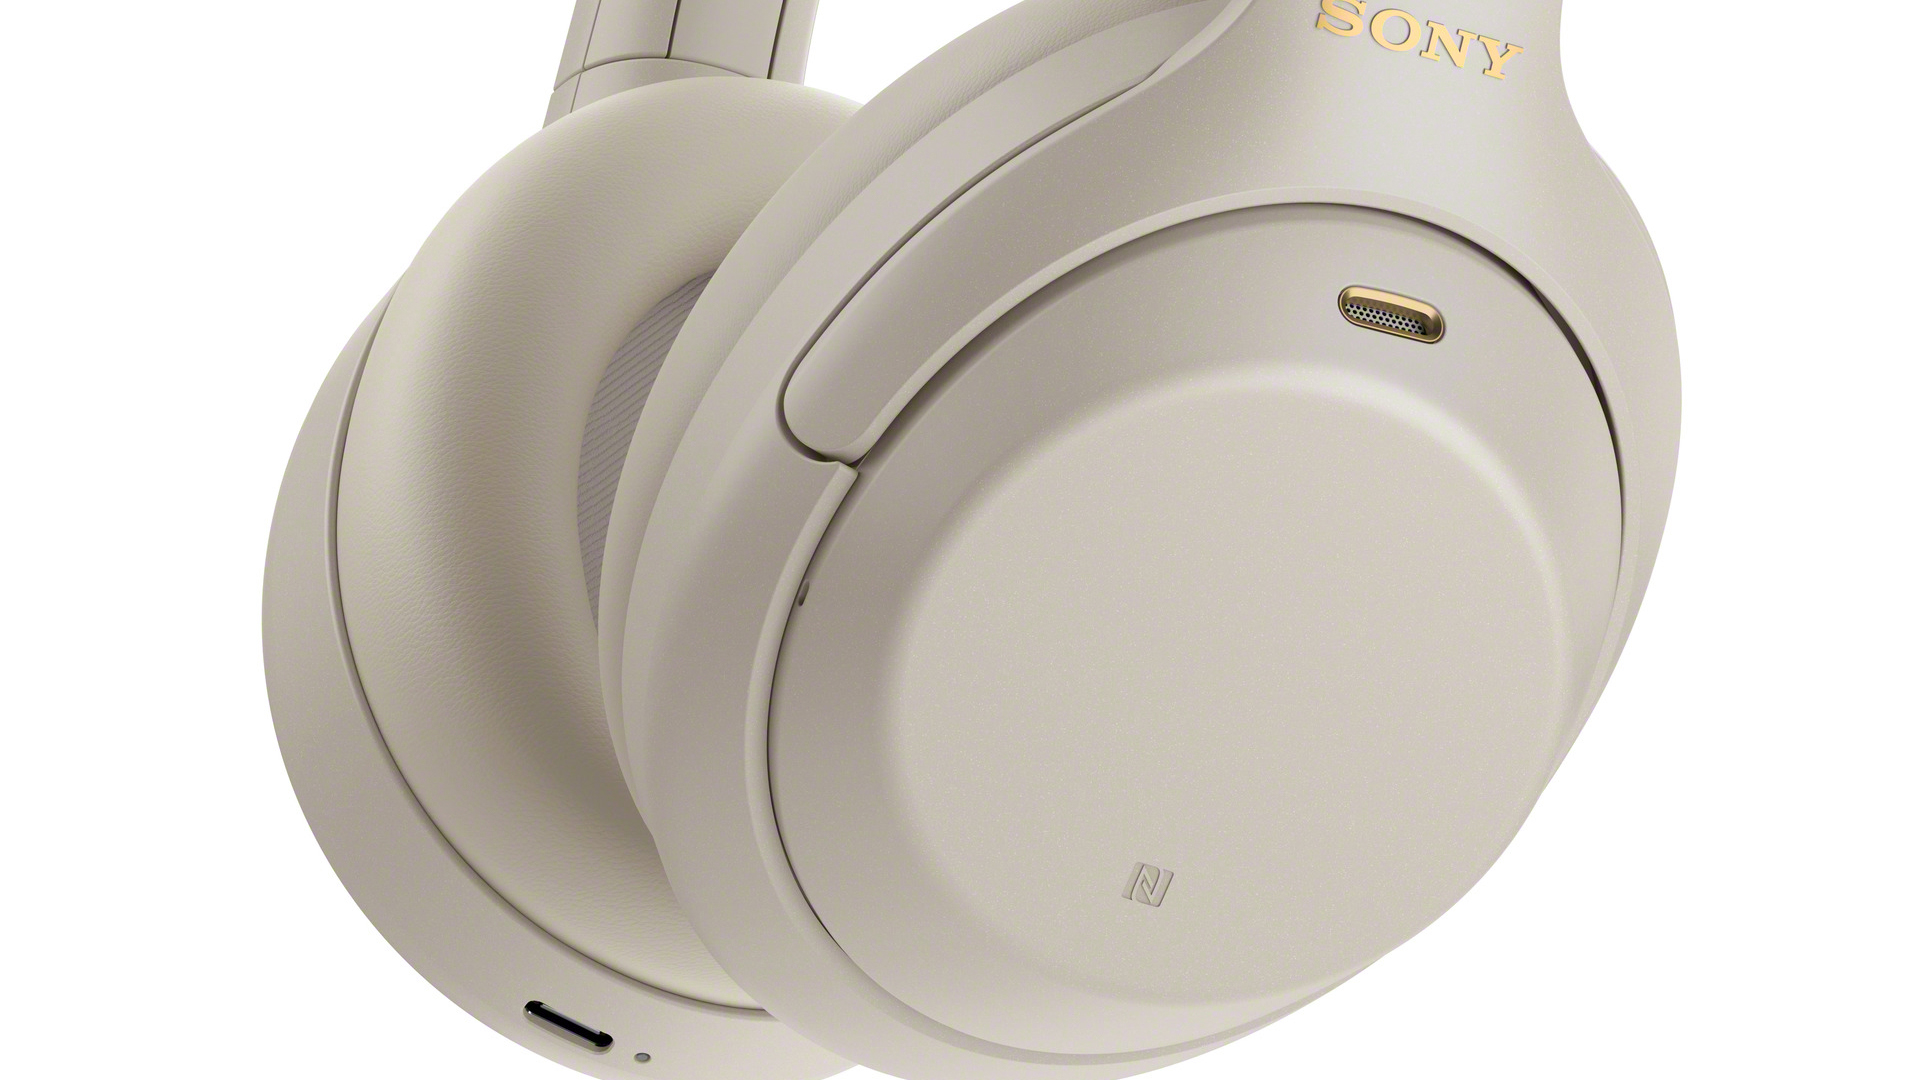 Sony's WH-1000XM4 headphones are back down to their lowest price